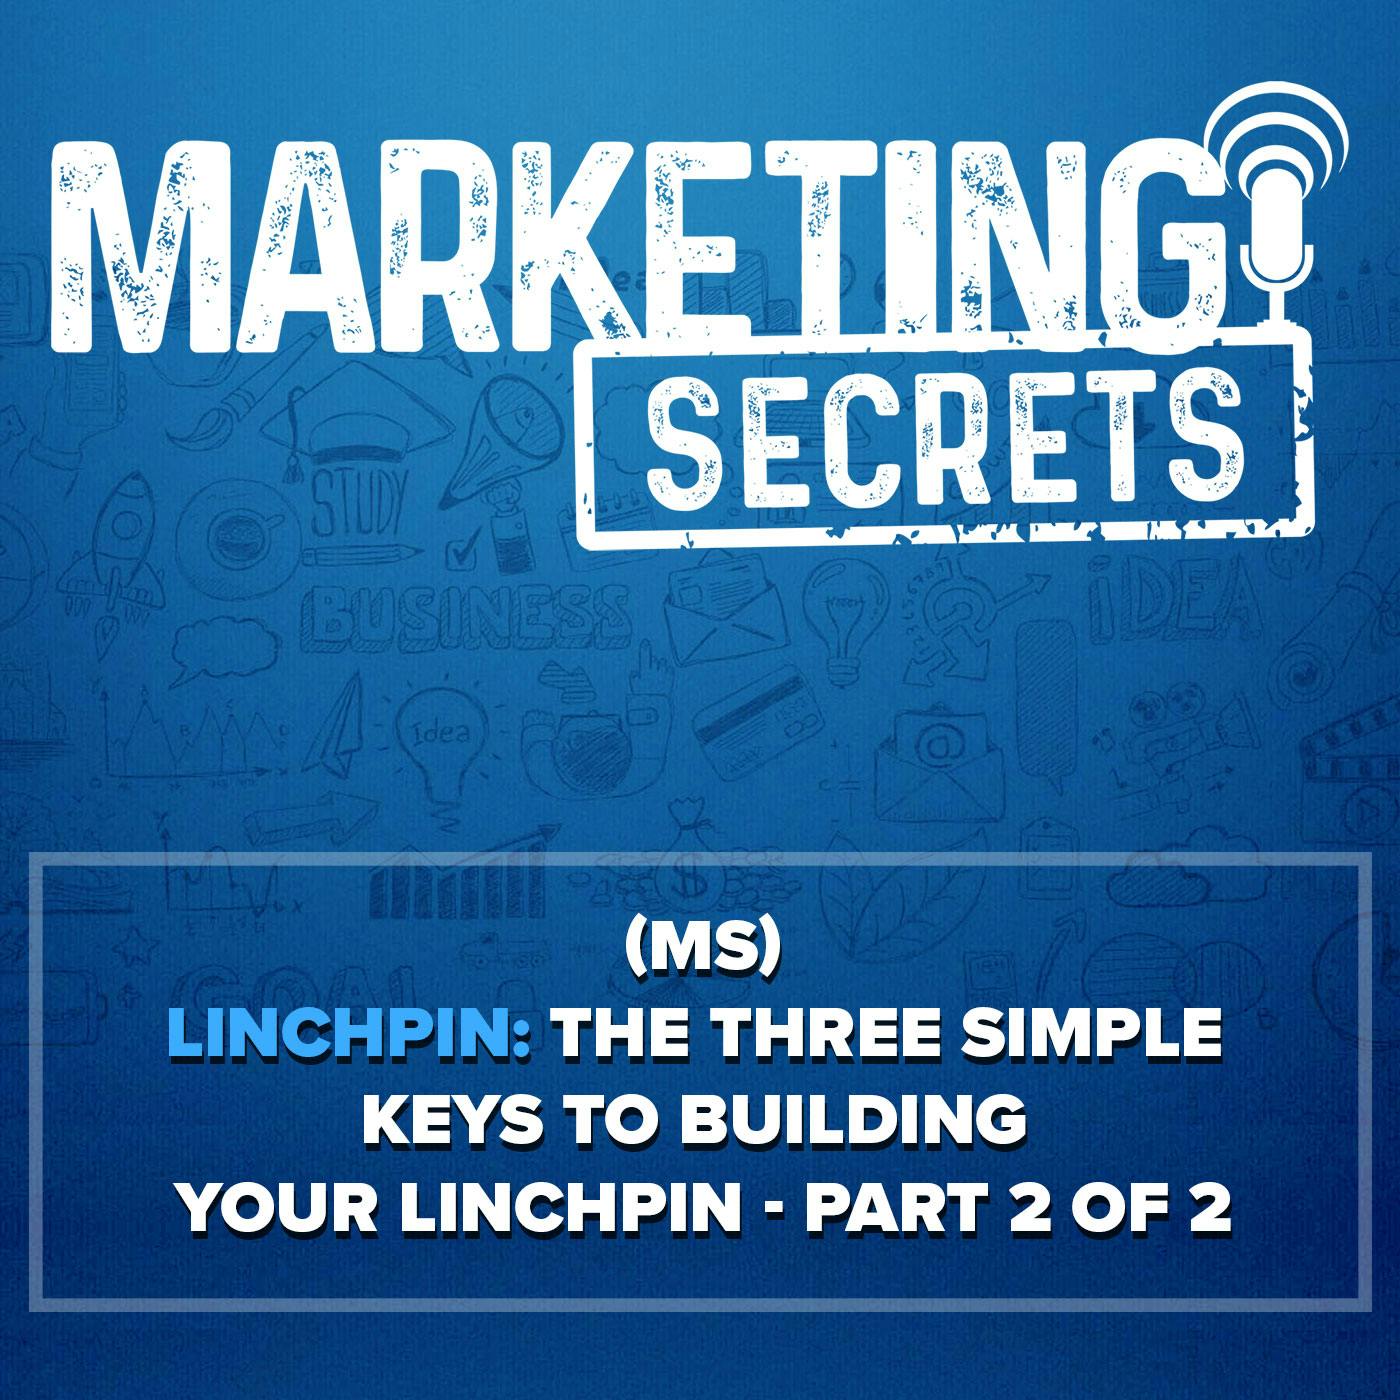 (MS) Linchpin: The Three Simple Keys To Building Your Linchpin - (Part 2 of 2)